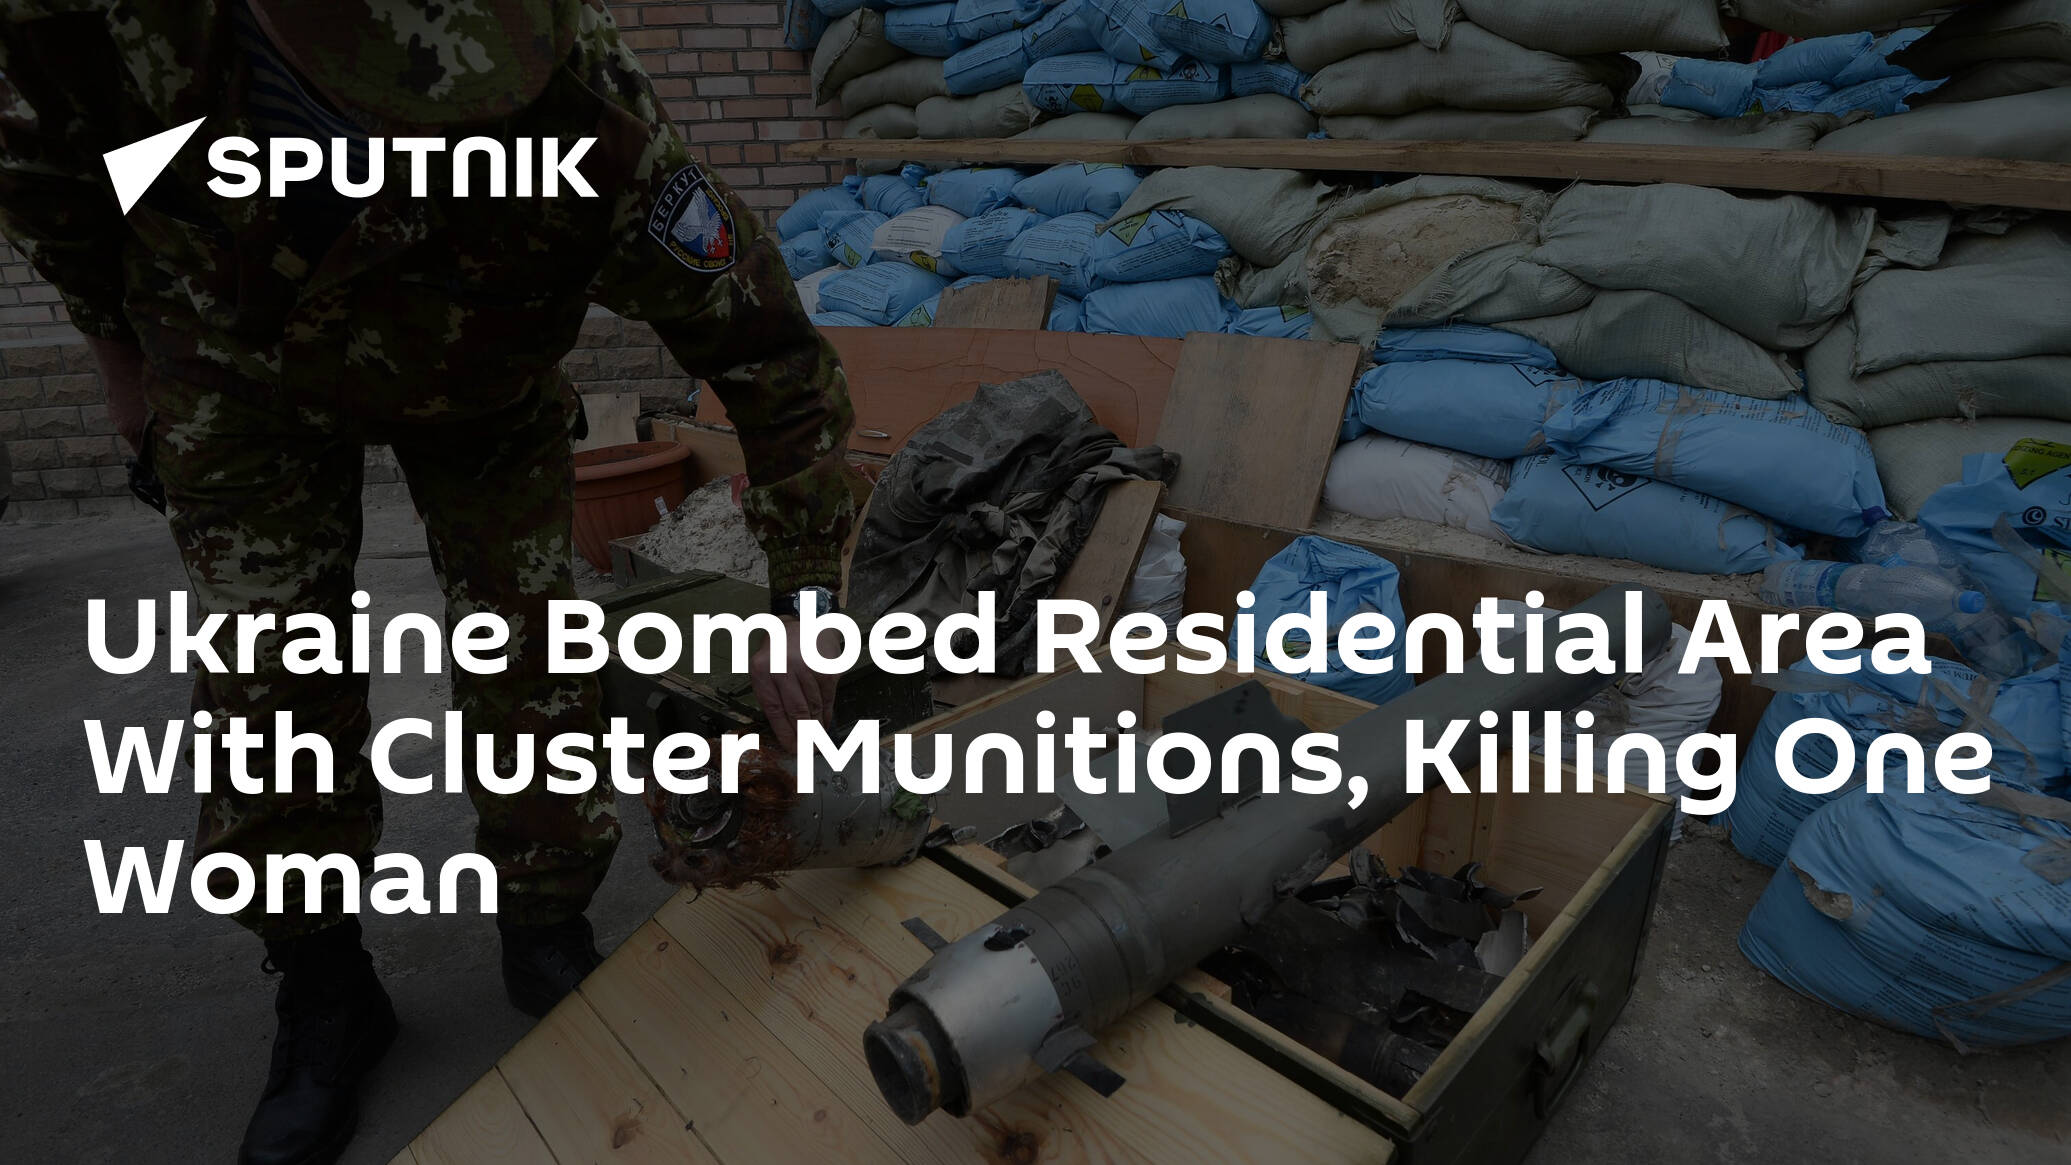 Ukraine Bombed Residential Area With Cluster Munitions, Killing One Woman